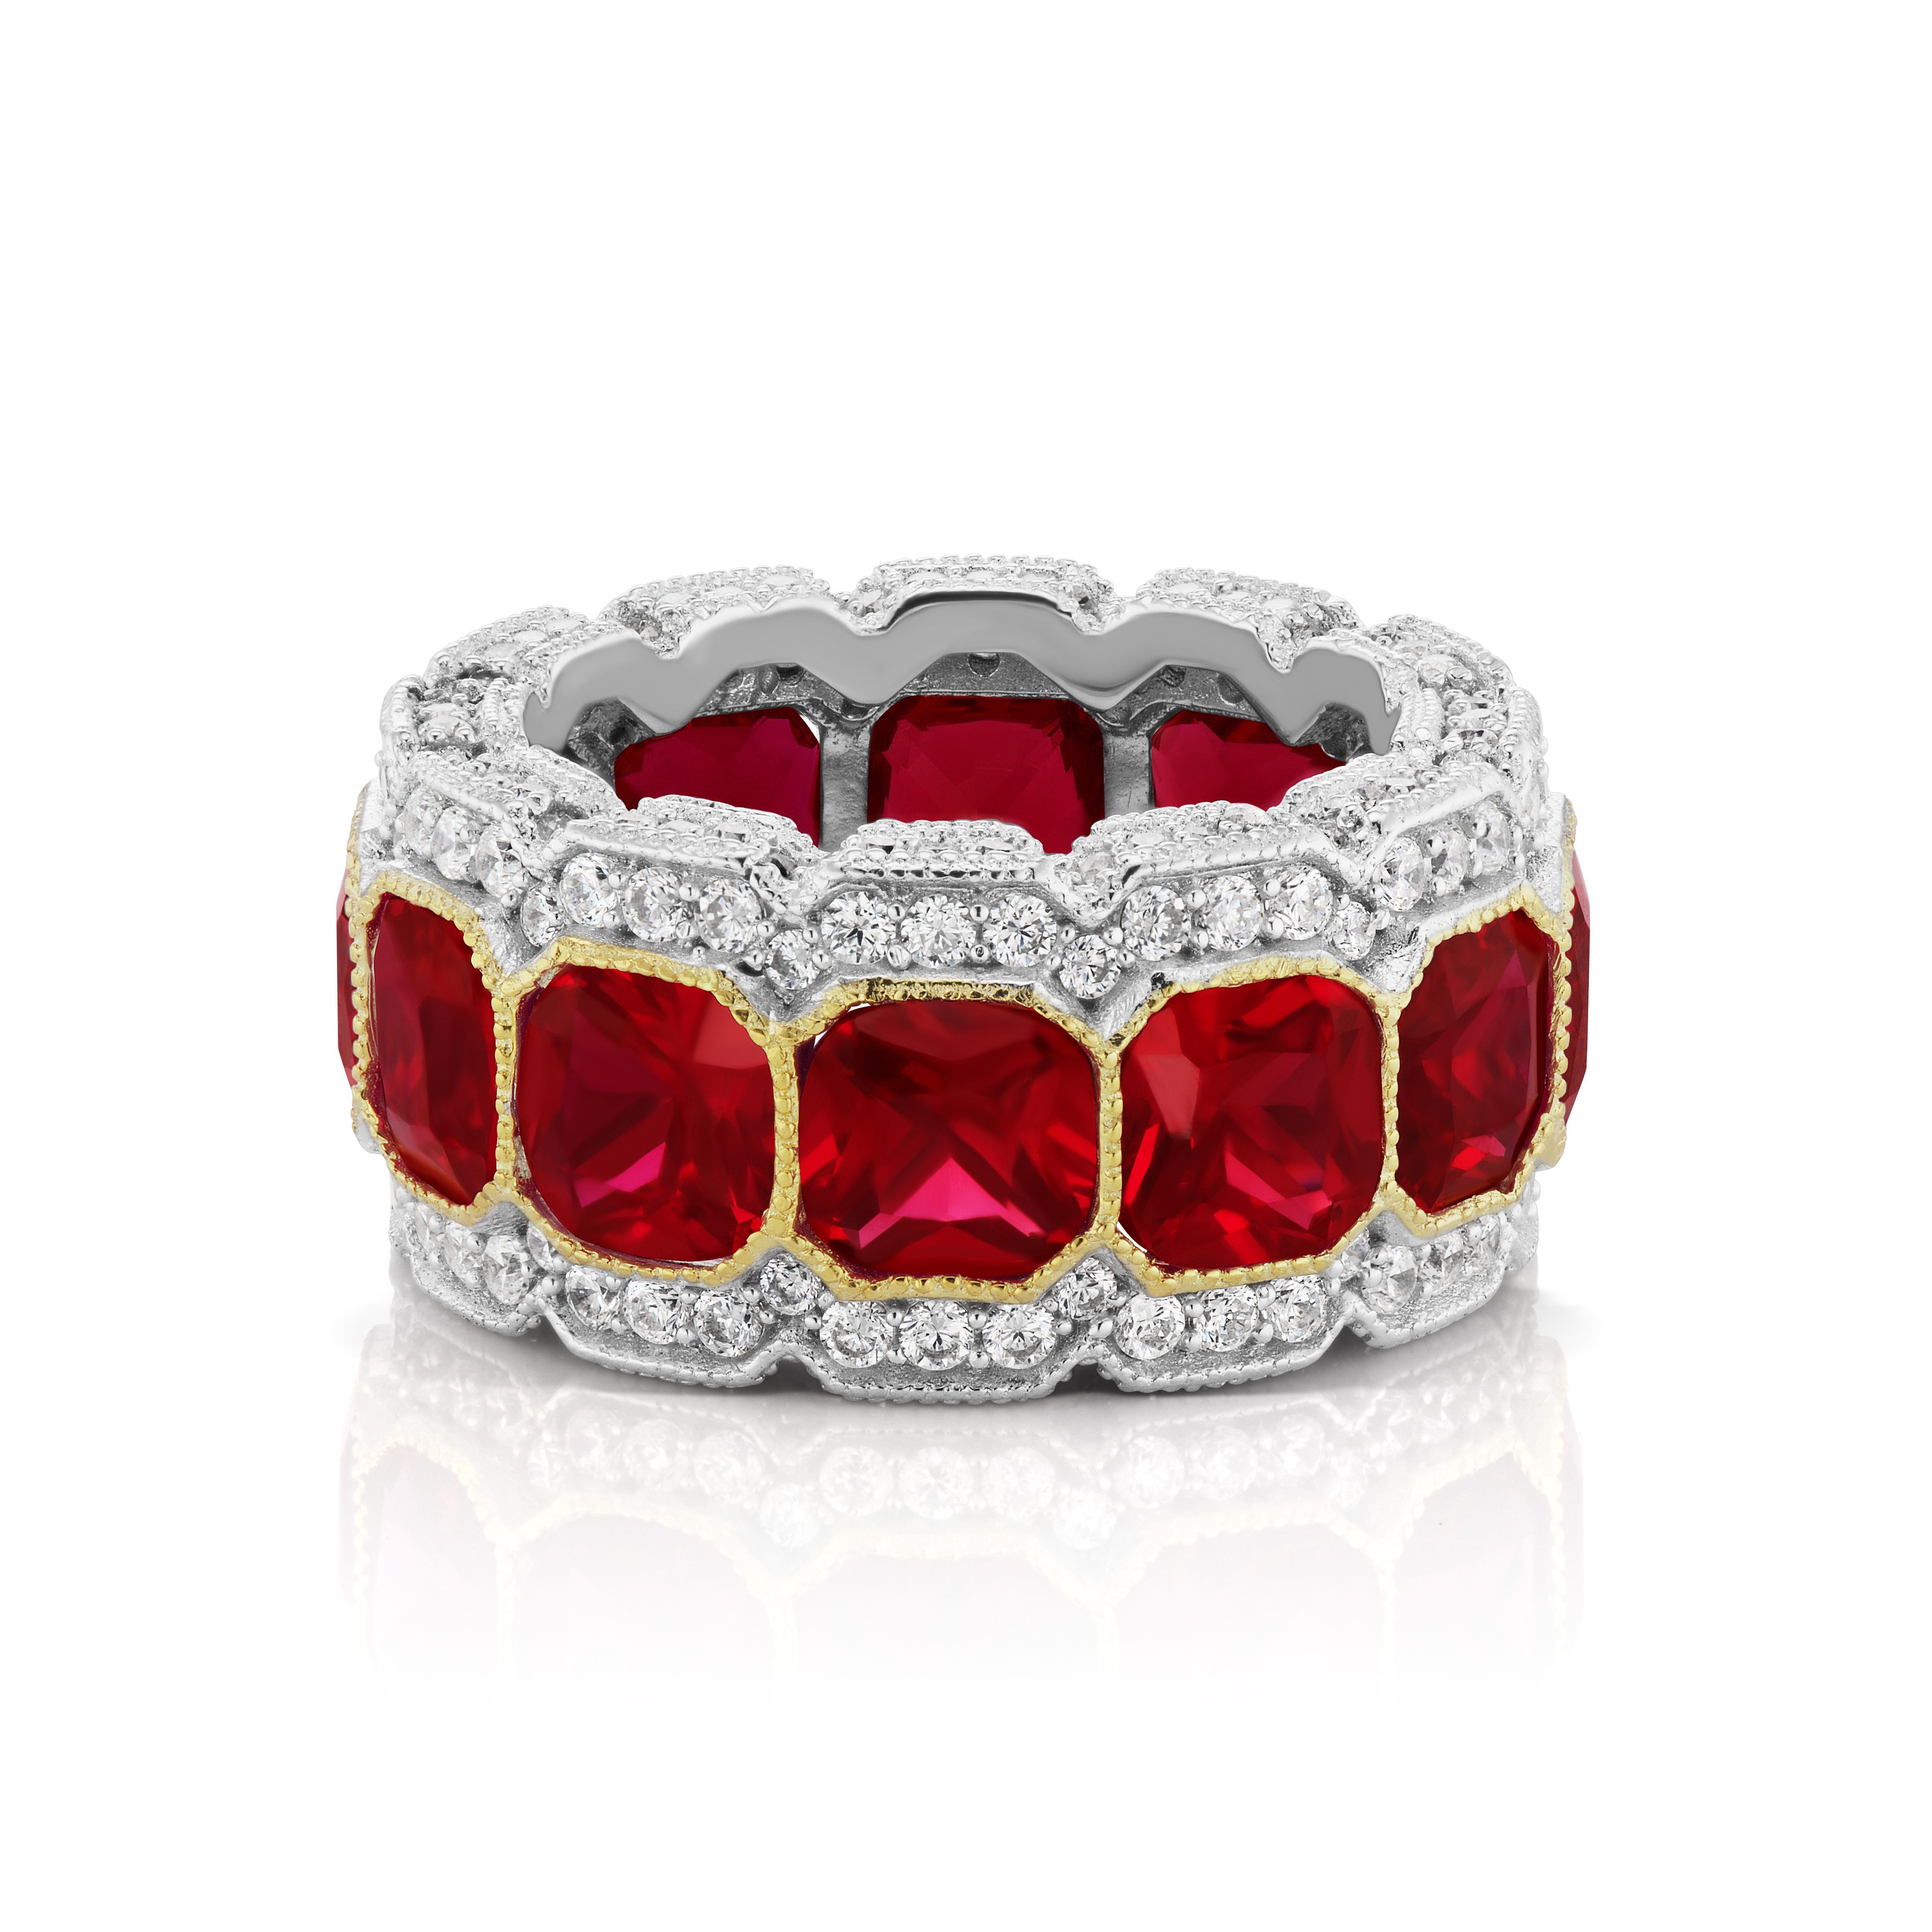 Magnificent Costume Jewelry stunning synthetic  ruby diamond half inch wide band mille-grain set with stones on the side as well all completely pave. Colored stones set in gold vermeil for distinct design. Each colored stone is about one carat look.